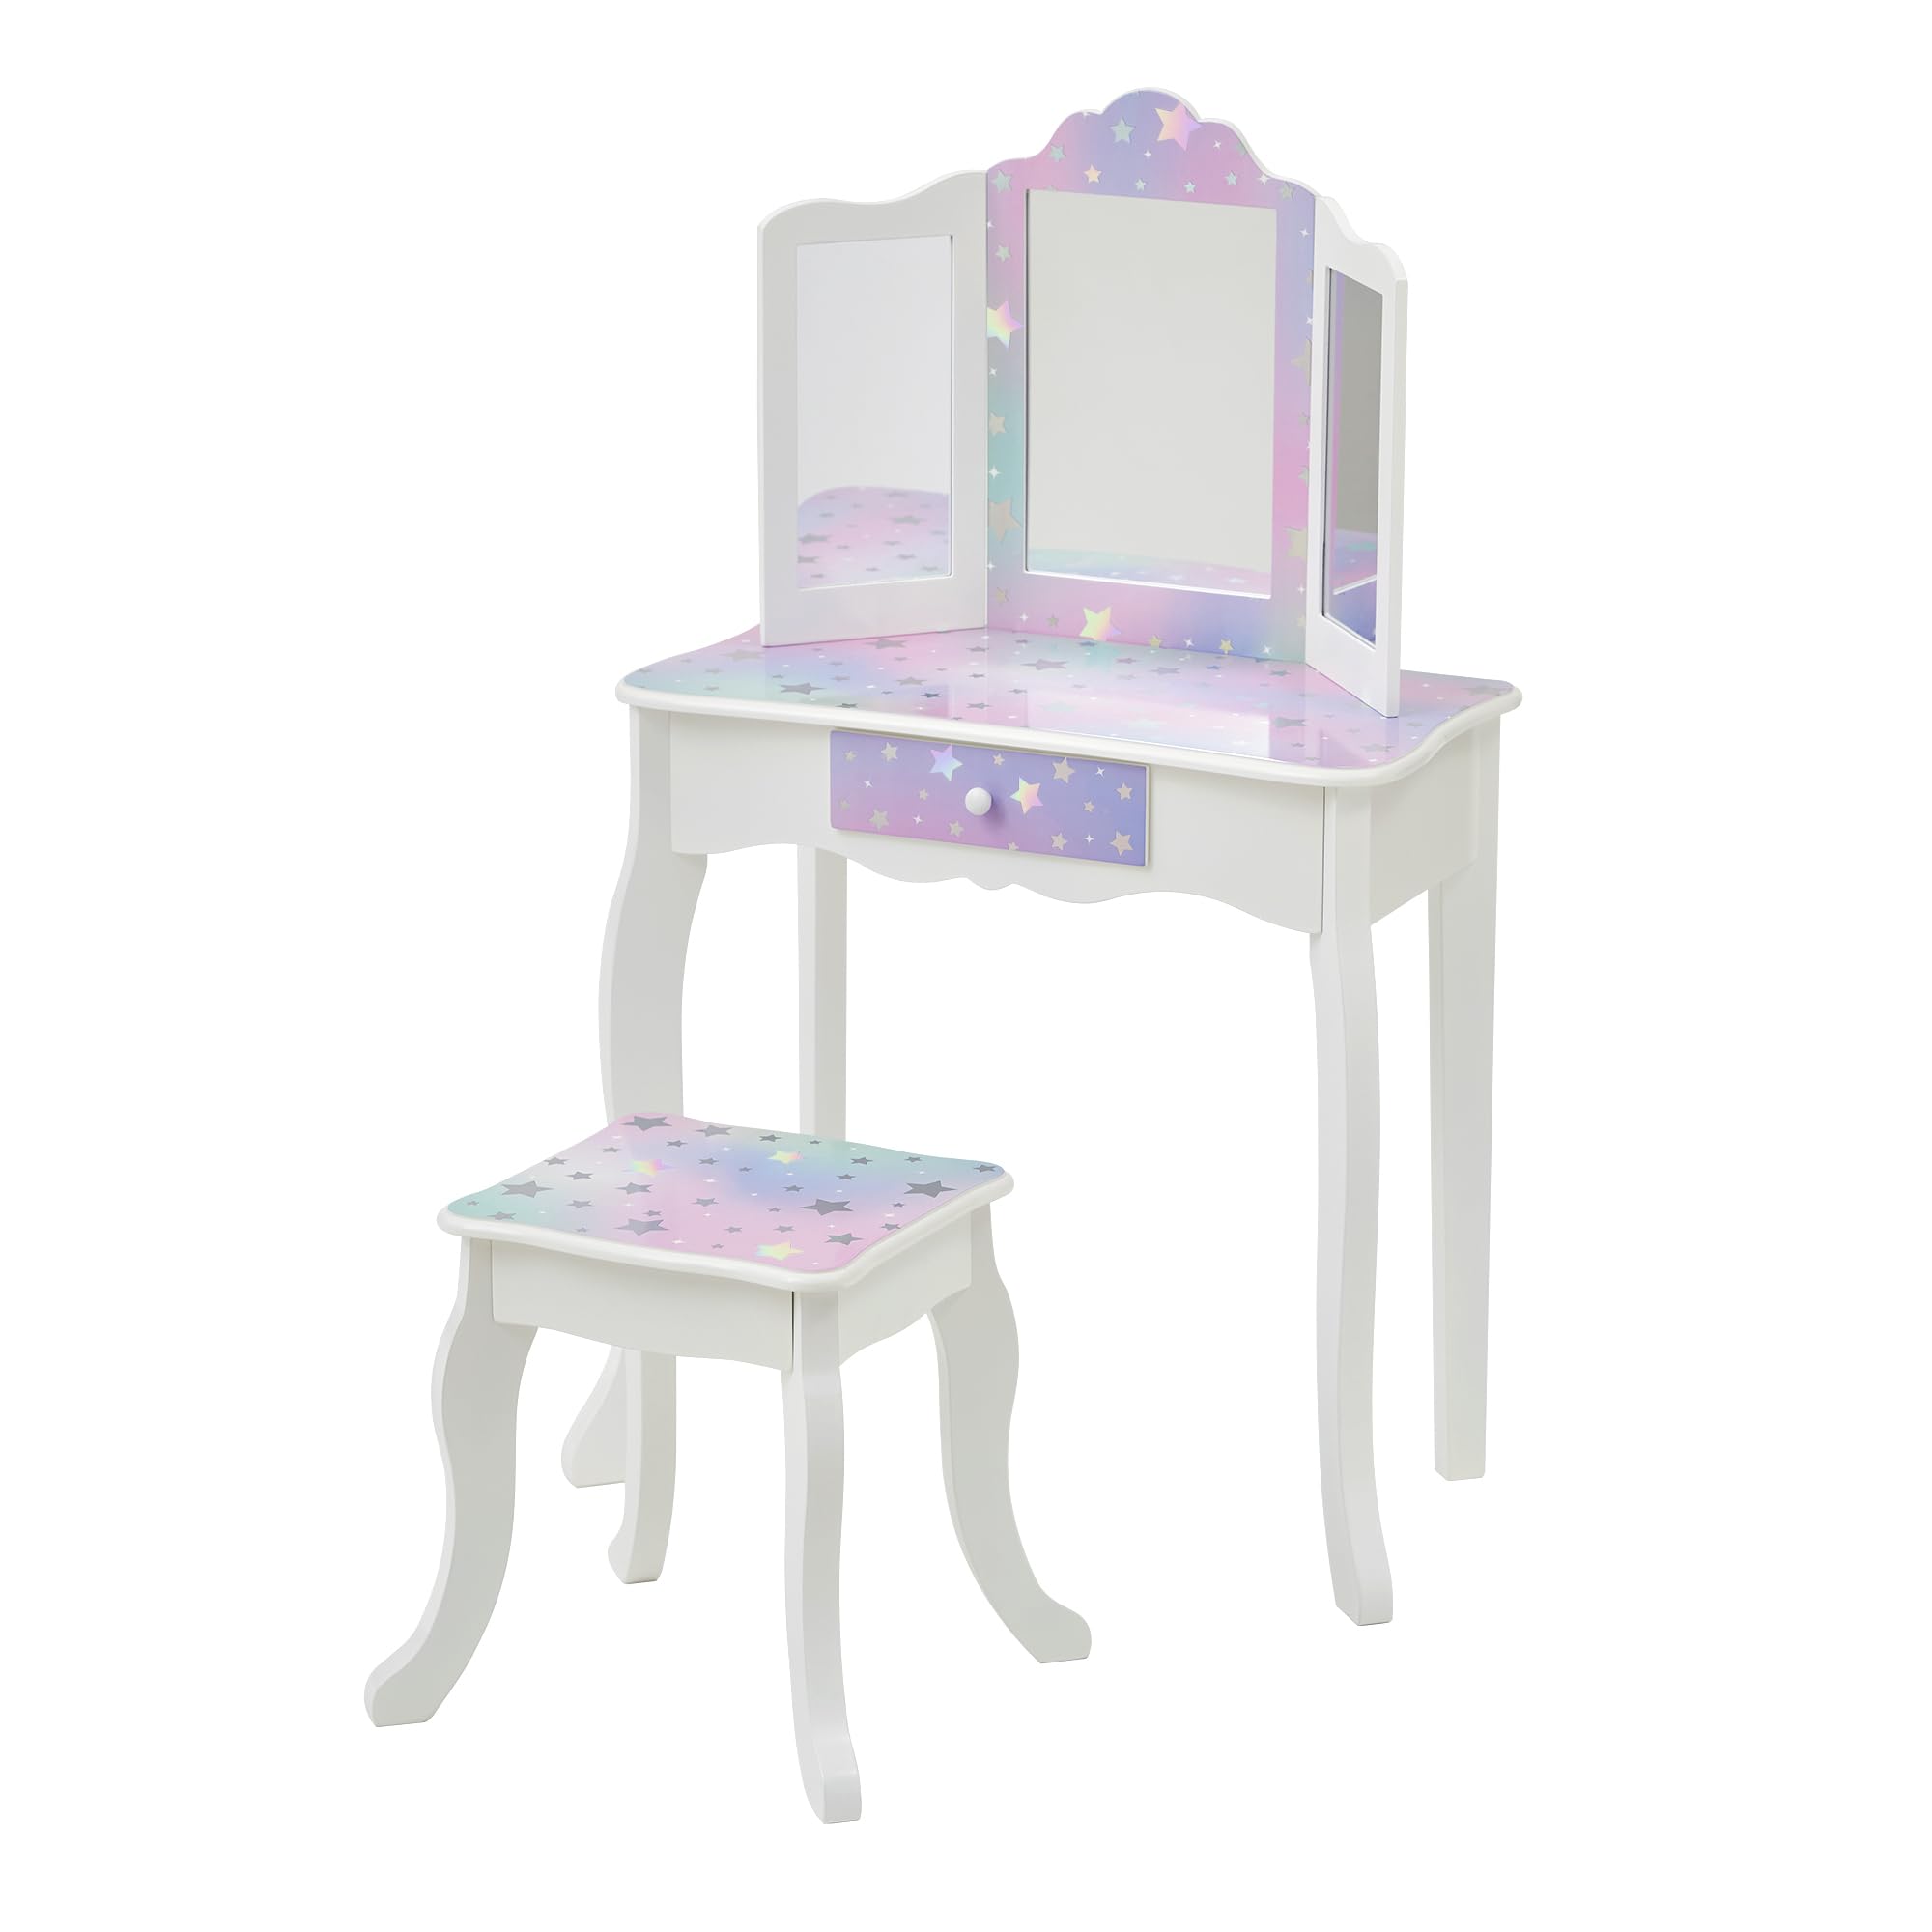 Teamson Kids - Pretend Play Kids Vanity, Table and Chair Vanity Set with Mirror Makeup Dressing Table with Drawer, Starry Sky Print Gisele Play Vanity Set, White/Lavender, Gift for Ages 3+